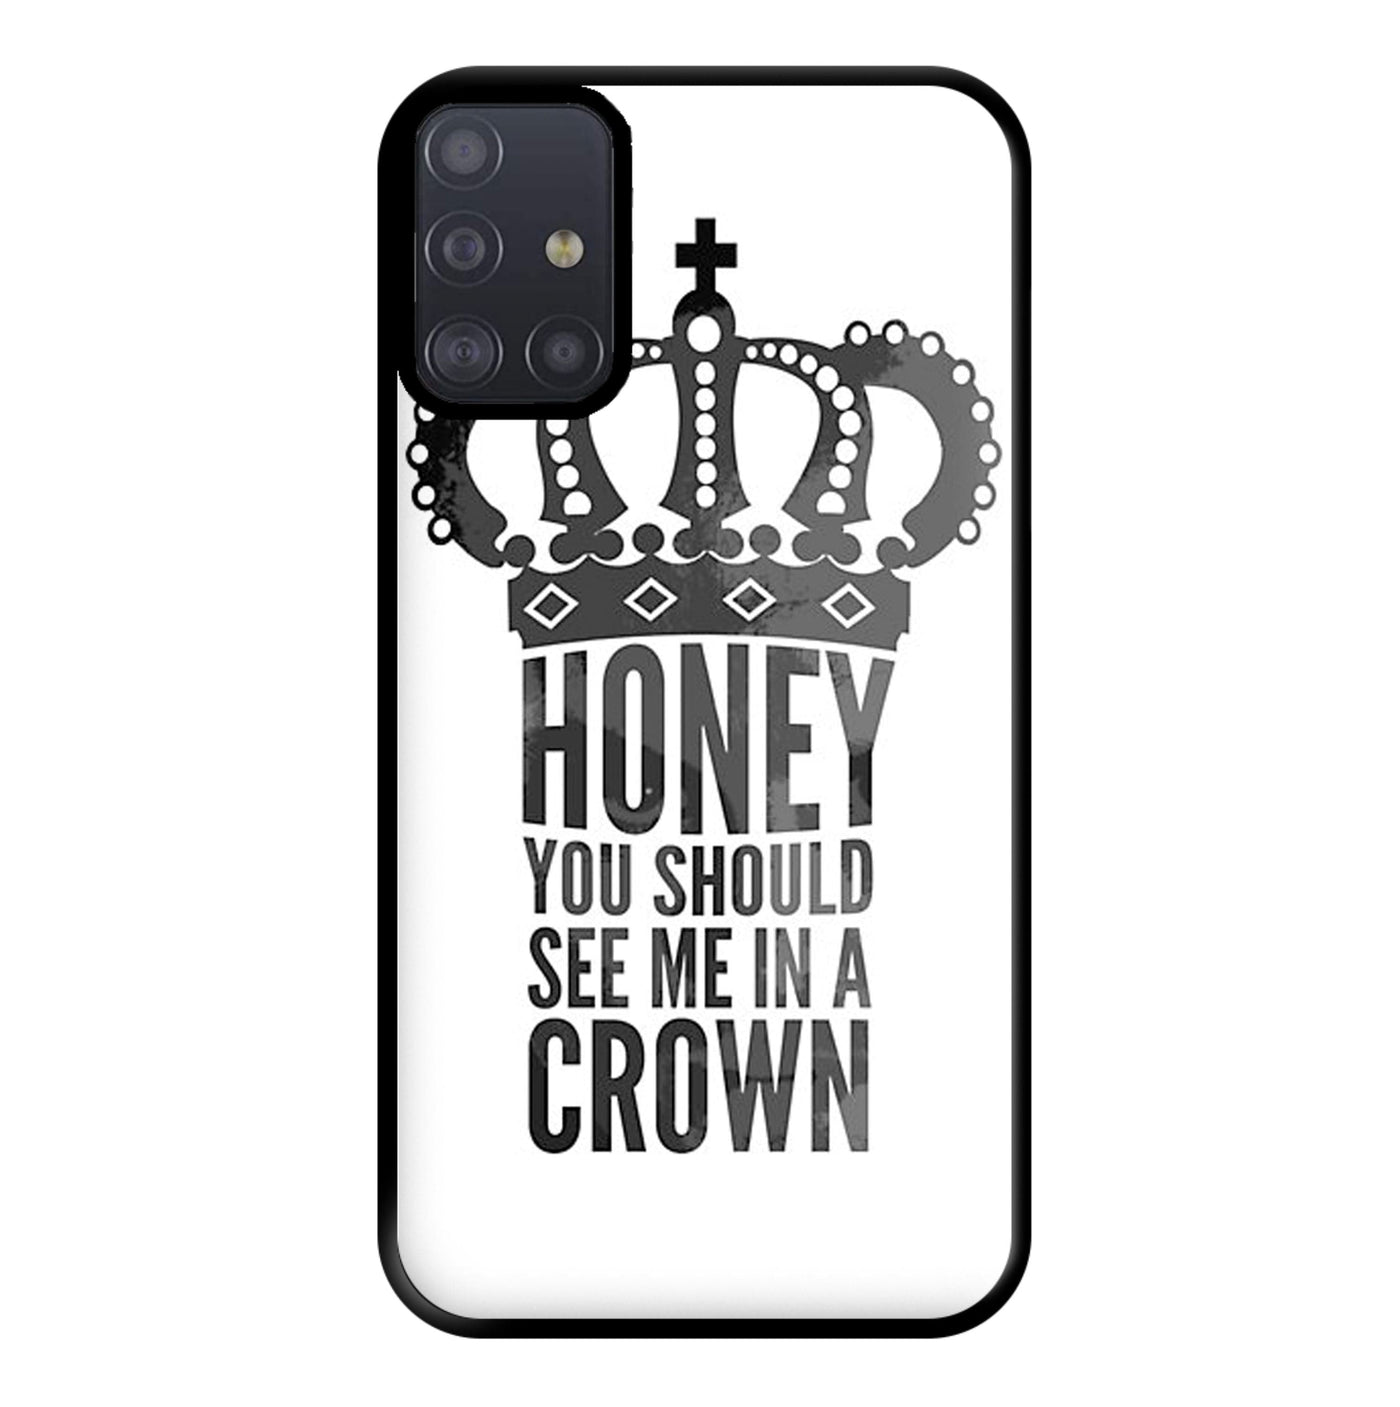 Honey You Should See Me In A Crown - Sherlock Phone Case